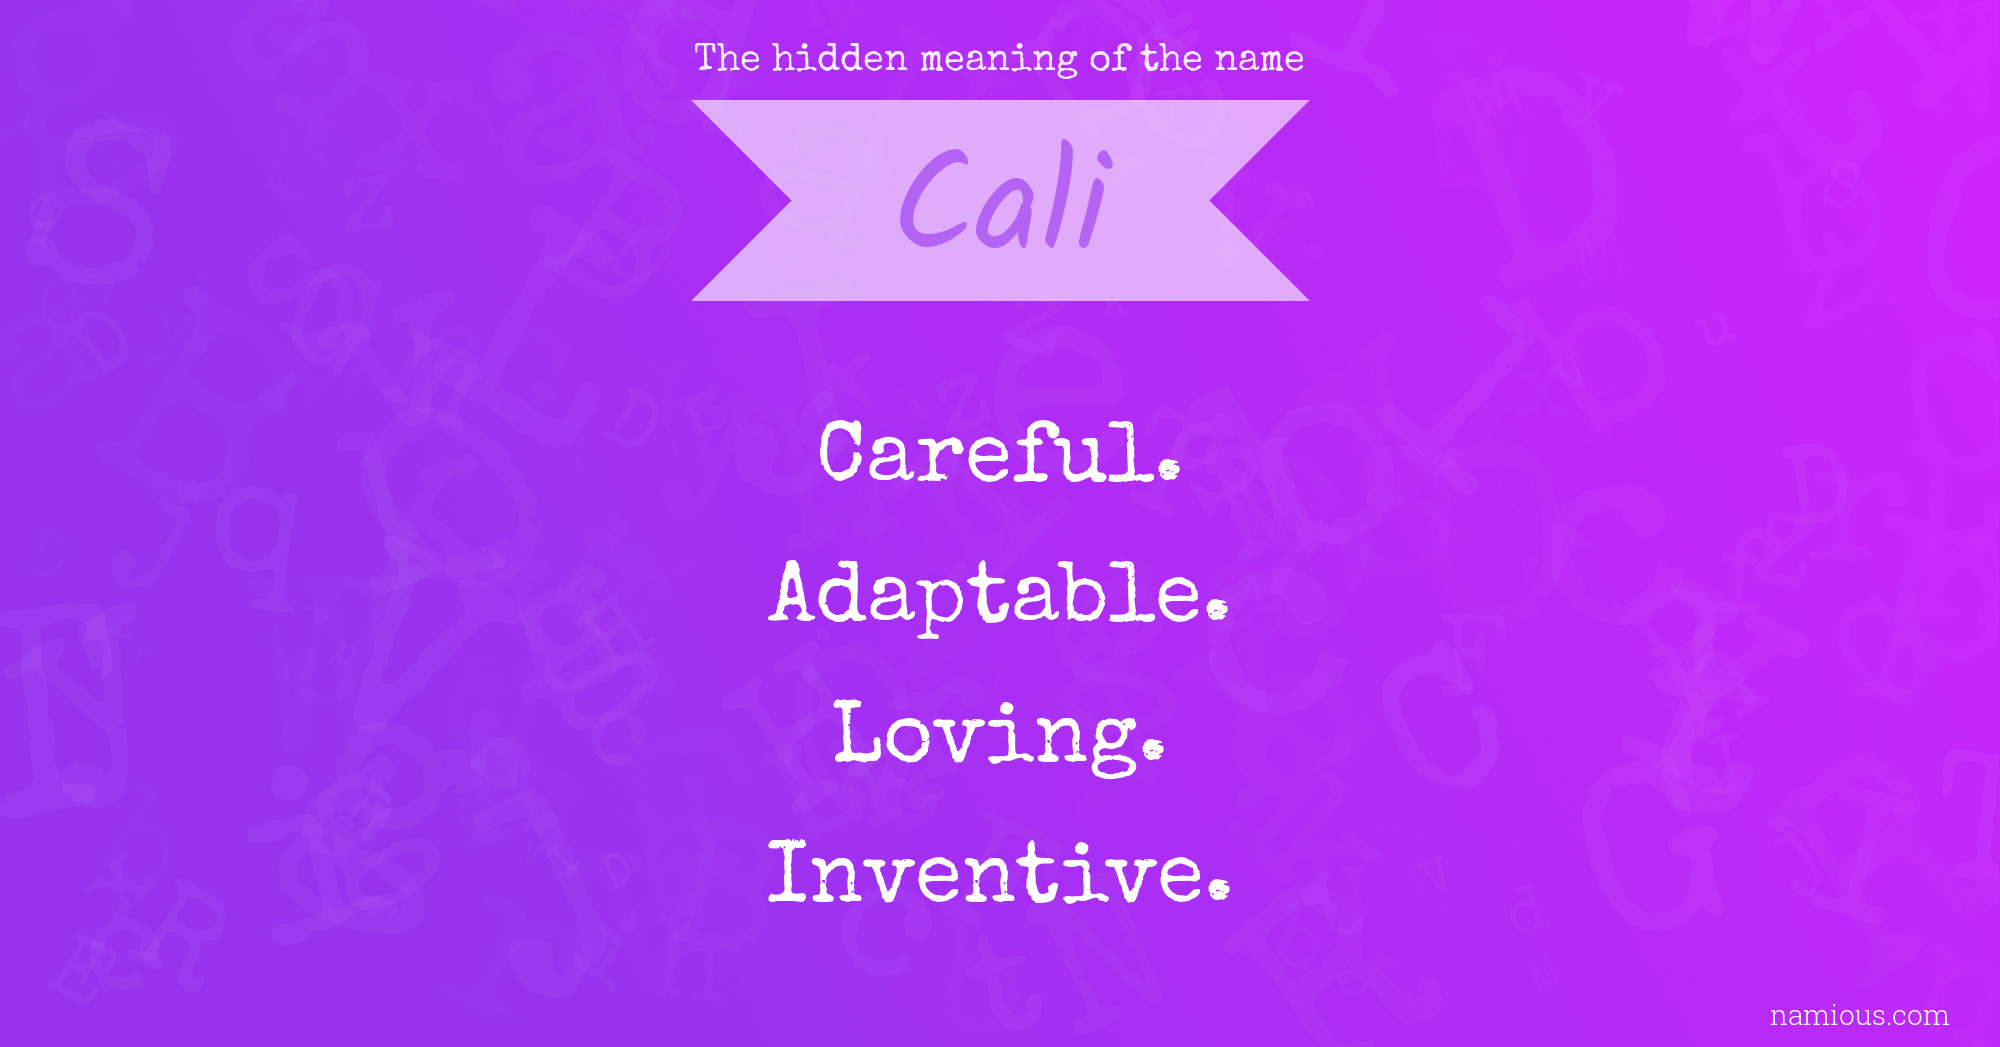 The hidden meaning of the name Cali